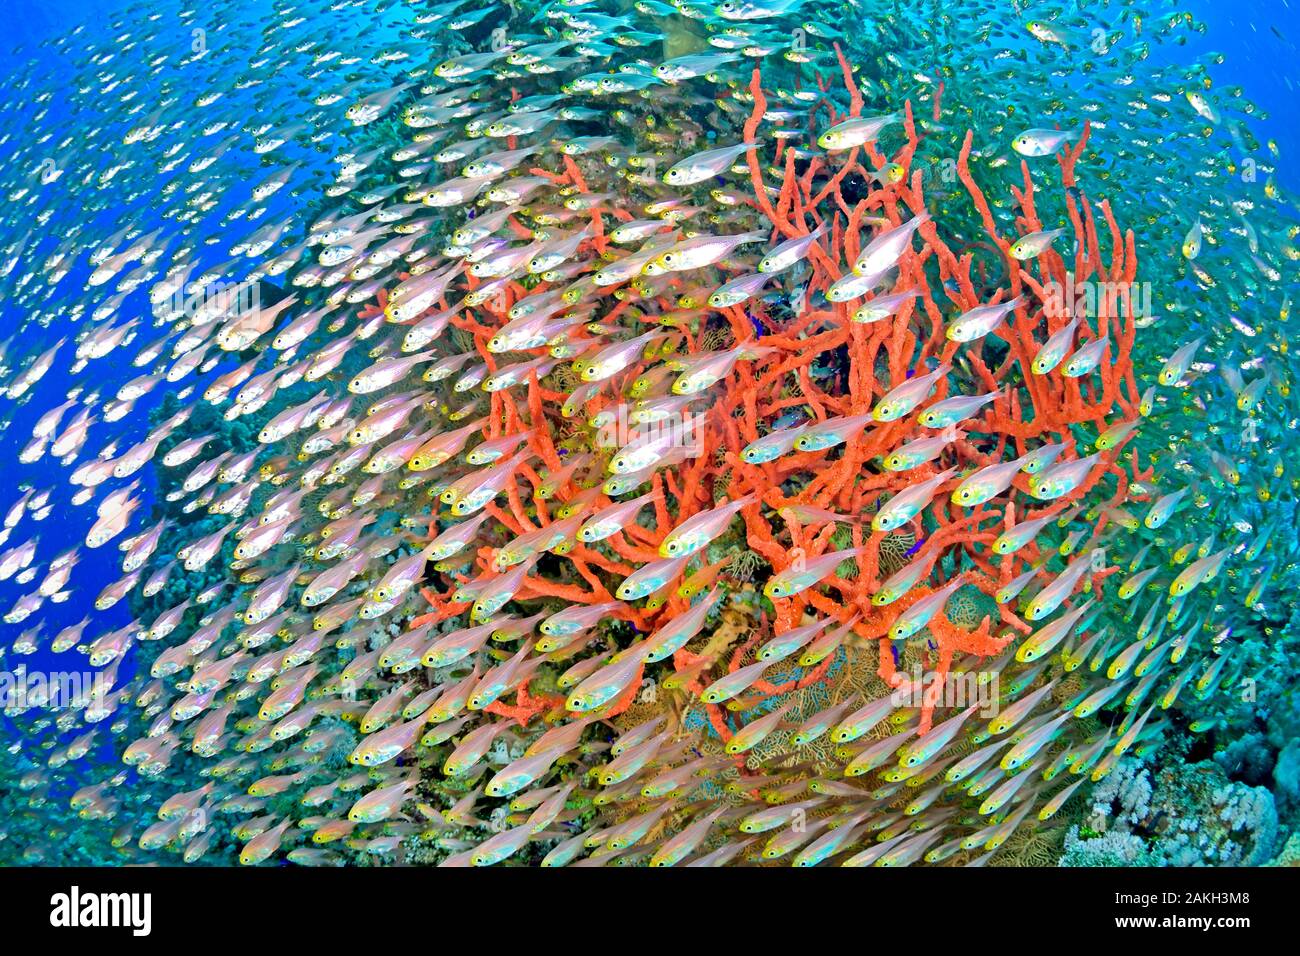 Egypte, Red Sea, glass-fish (Parapriacanthus guentheri) and red bushy sponges Stock Photo